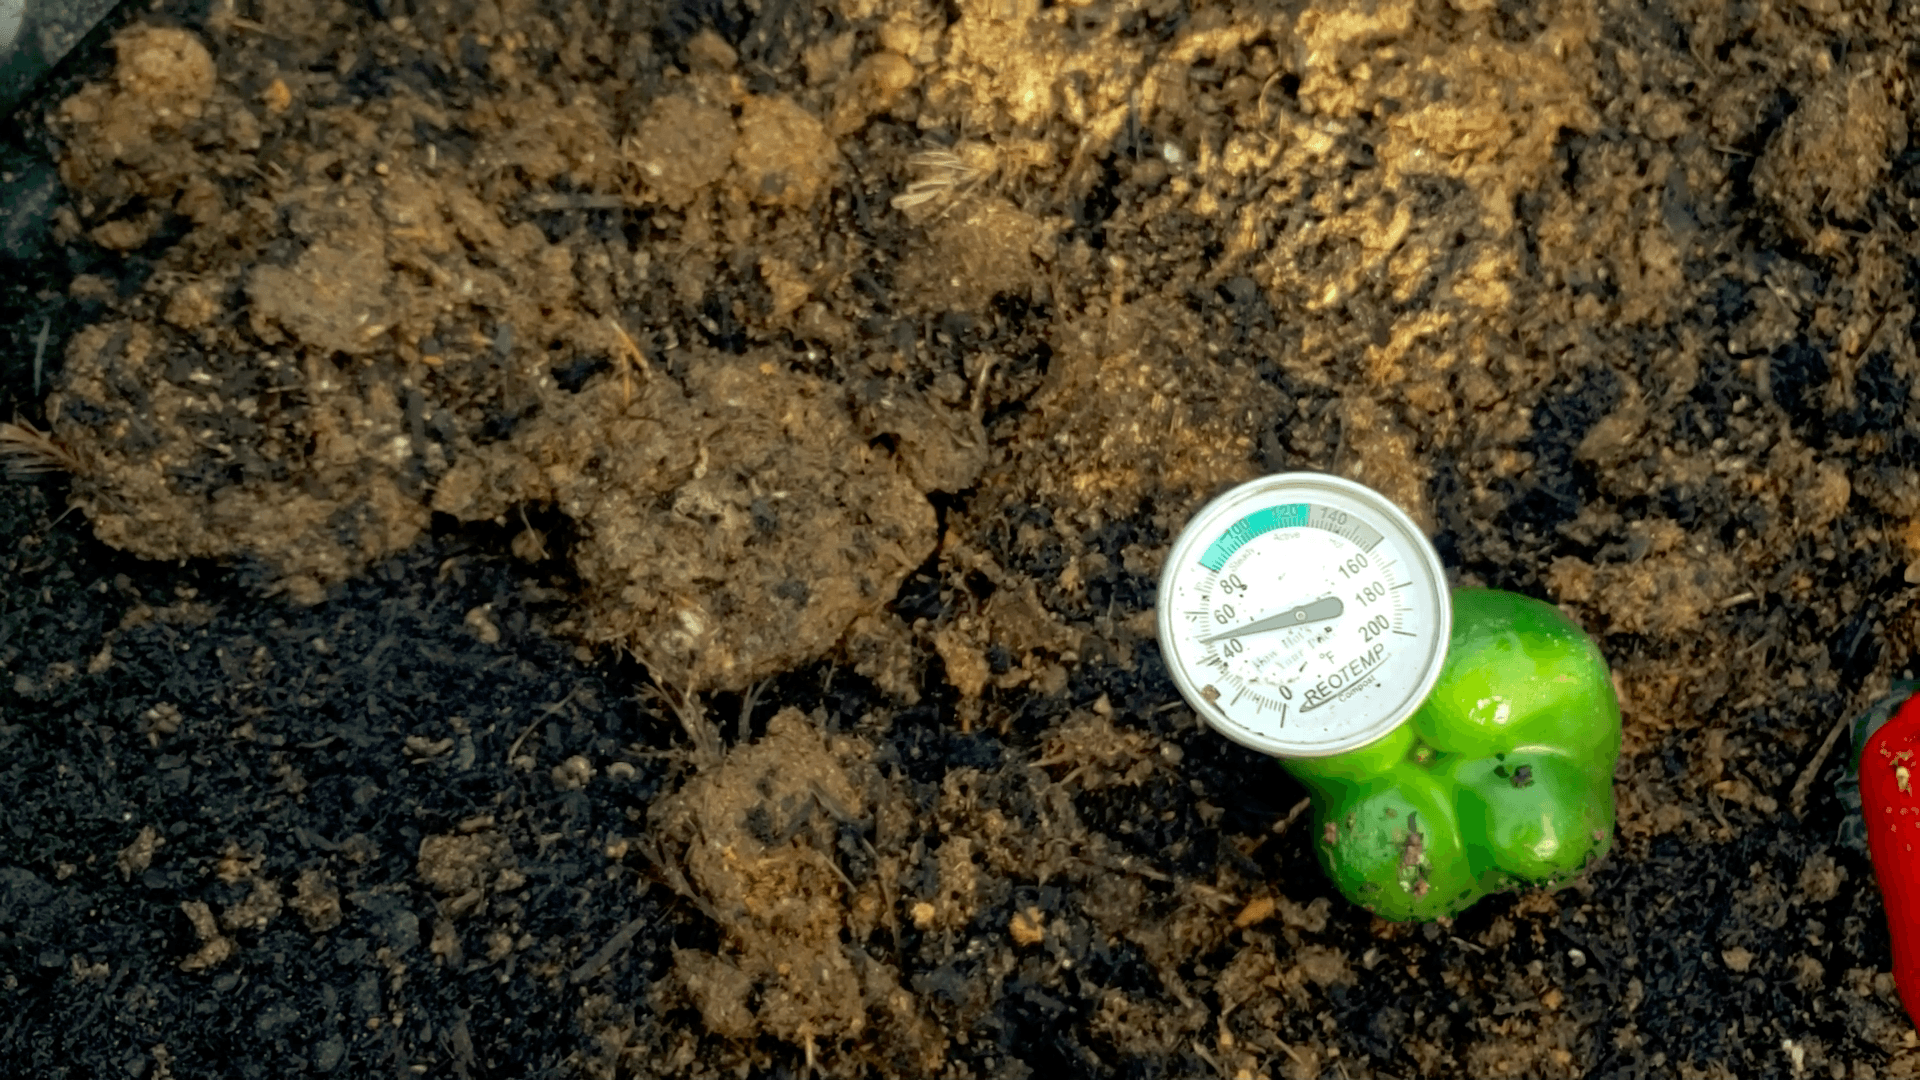 Image of a compost pile with a thermometer in it.